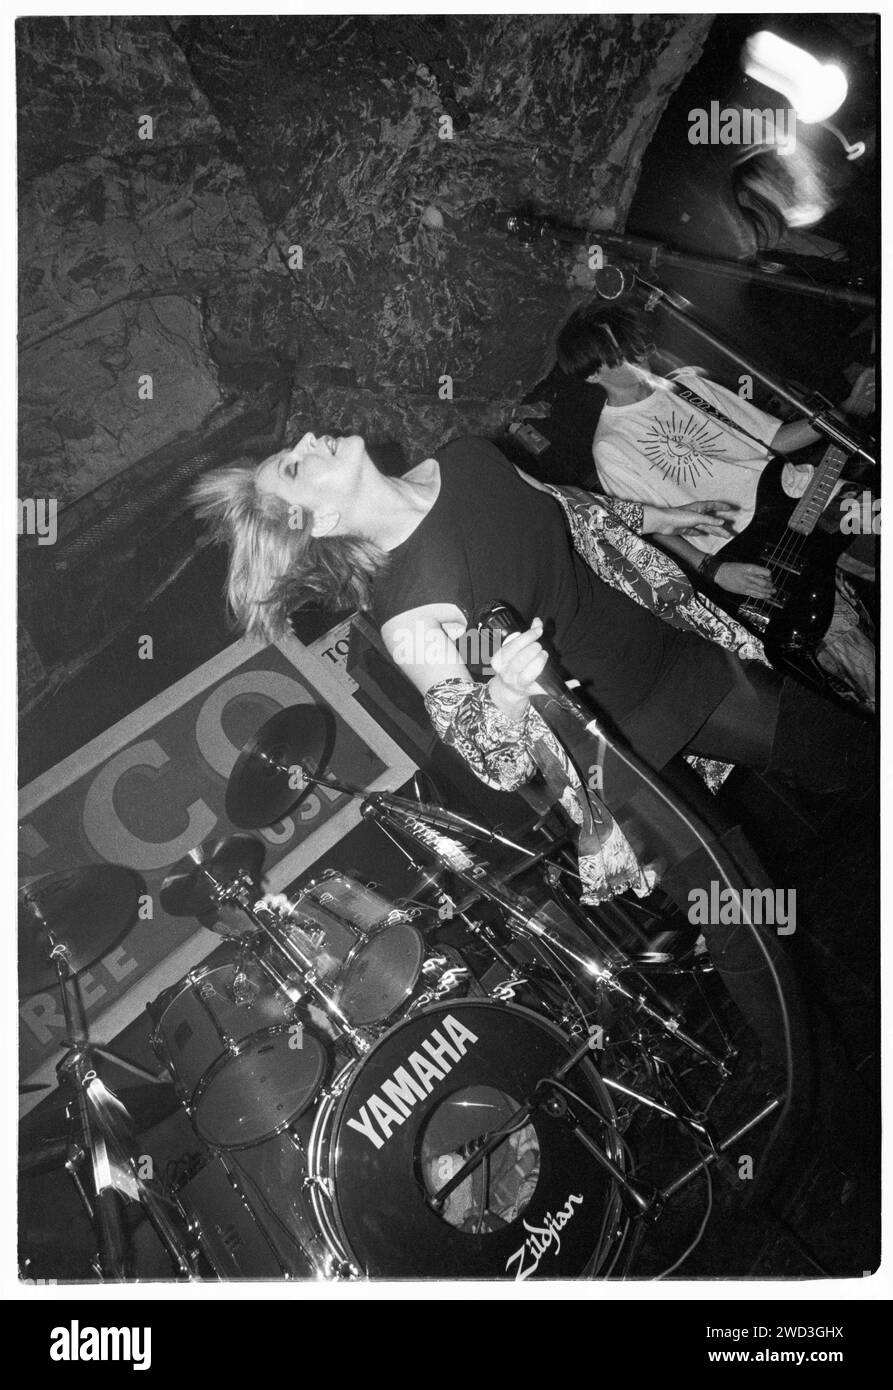 TOYAH, CONCERT, 1993: Punk icon Toyah Wilcox playing live at TJ’s in Newport, Wales, UK on 9 November 1993. Photo: Rob Watkins. INFO:  Toyah Willcox, known mononymously as Toyah, is a British singer, actress, and presenter. Rising to prominence in the late '70s and '80s, her vibrant stage presence and diverse career span pop music, film, and theatre, establishing her as a multifaceted and iconic entertainer. Stock Photo